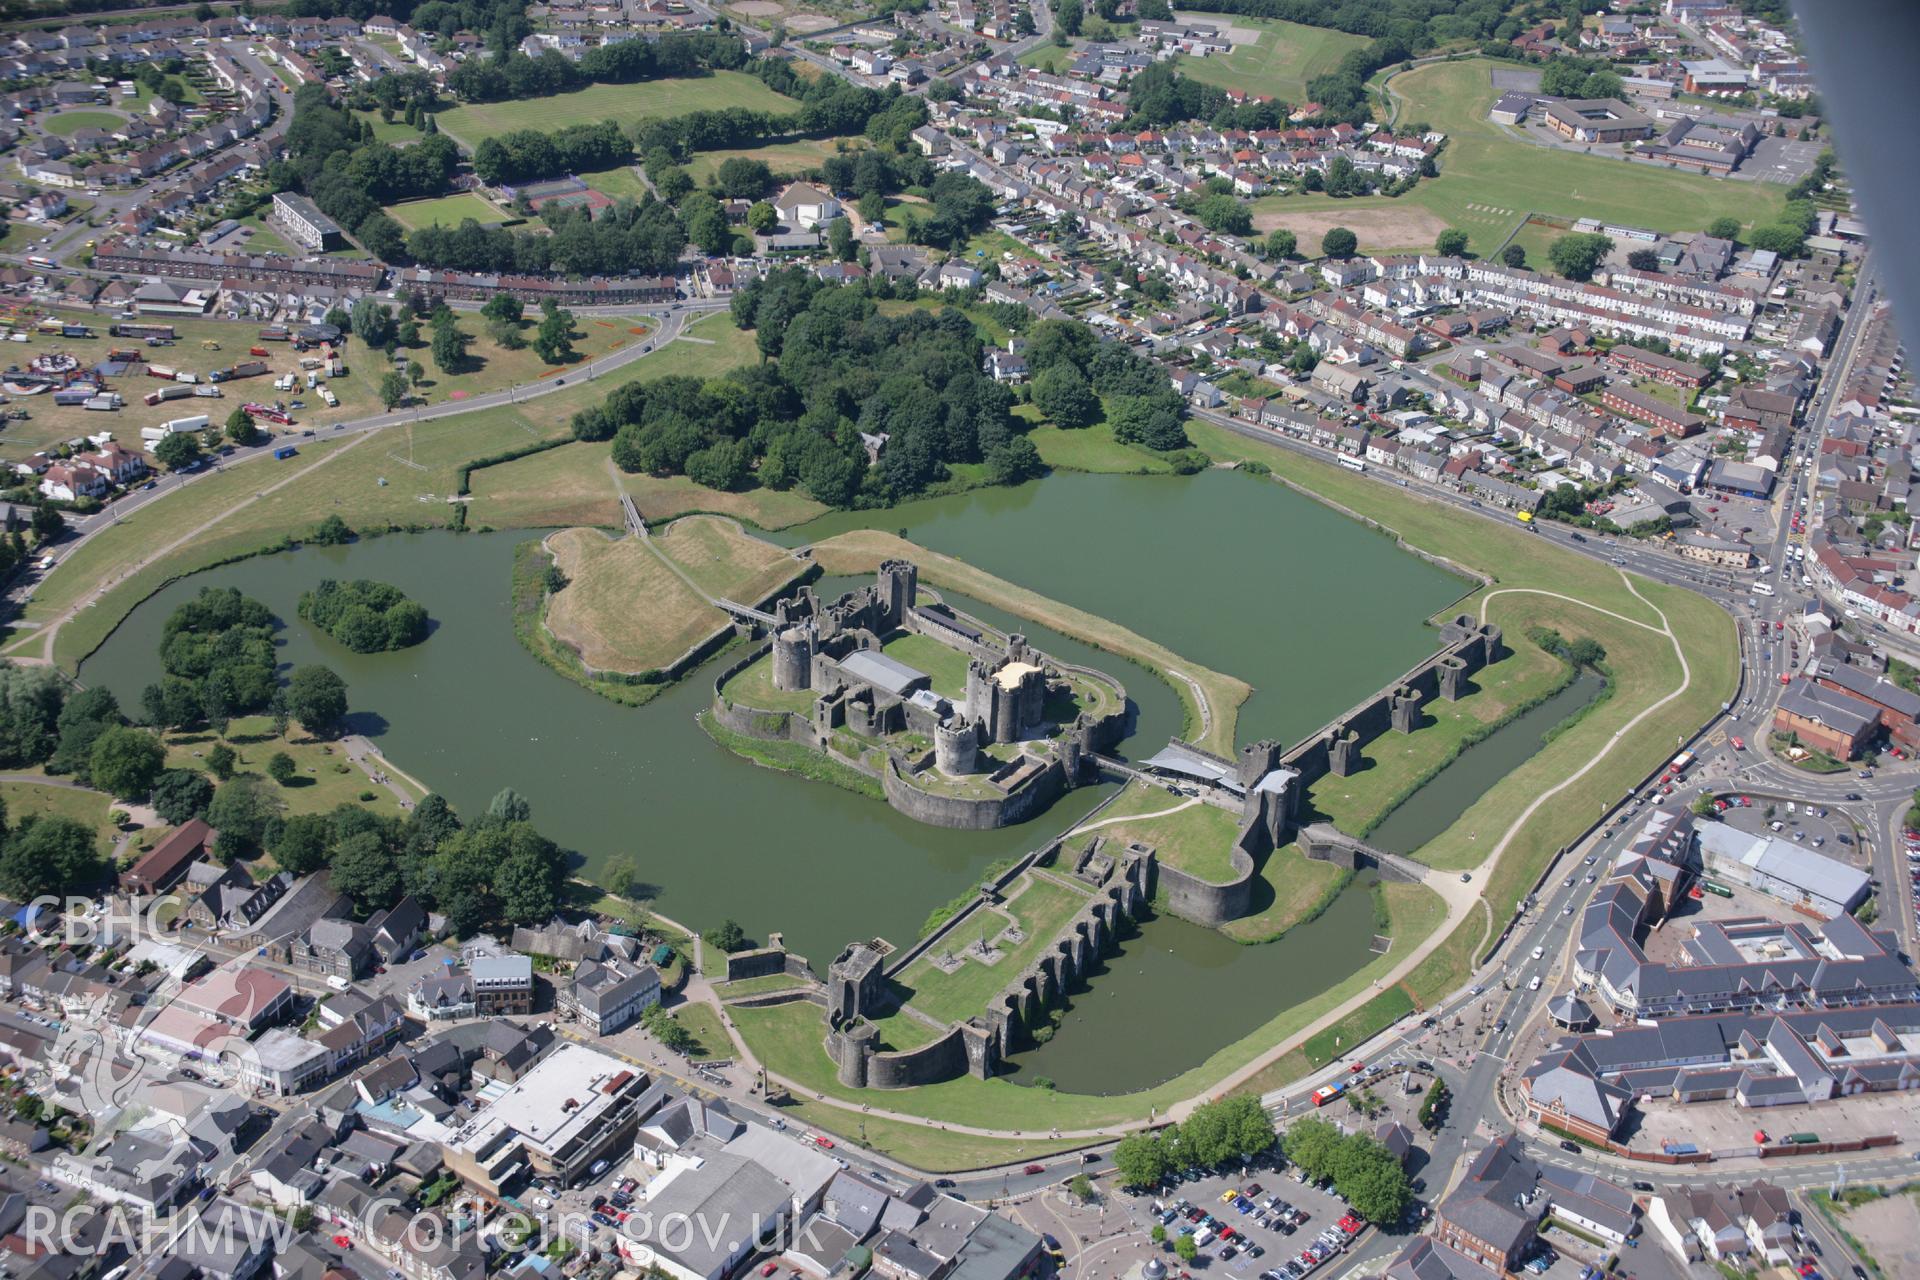 RCAHMW colour oblique aerial photograph of Caerphilly Castle. Taken on 24 July 2006 by Toby Driver.